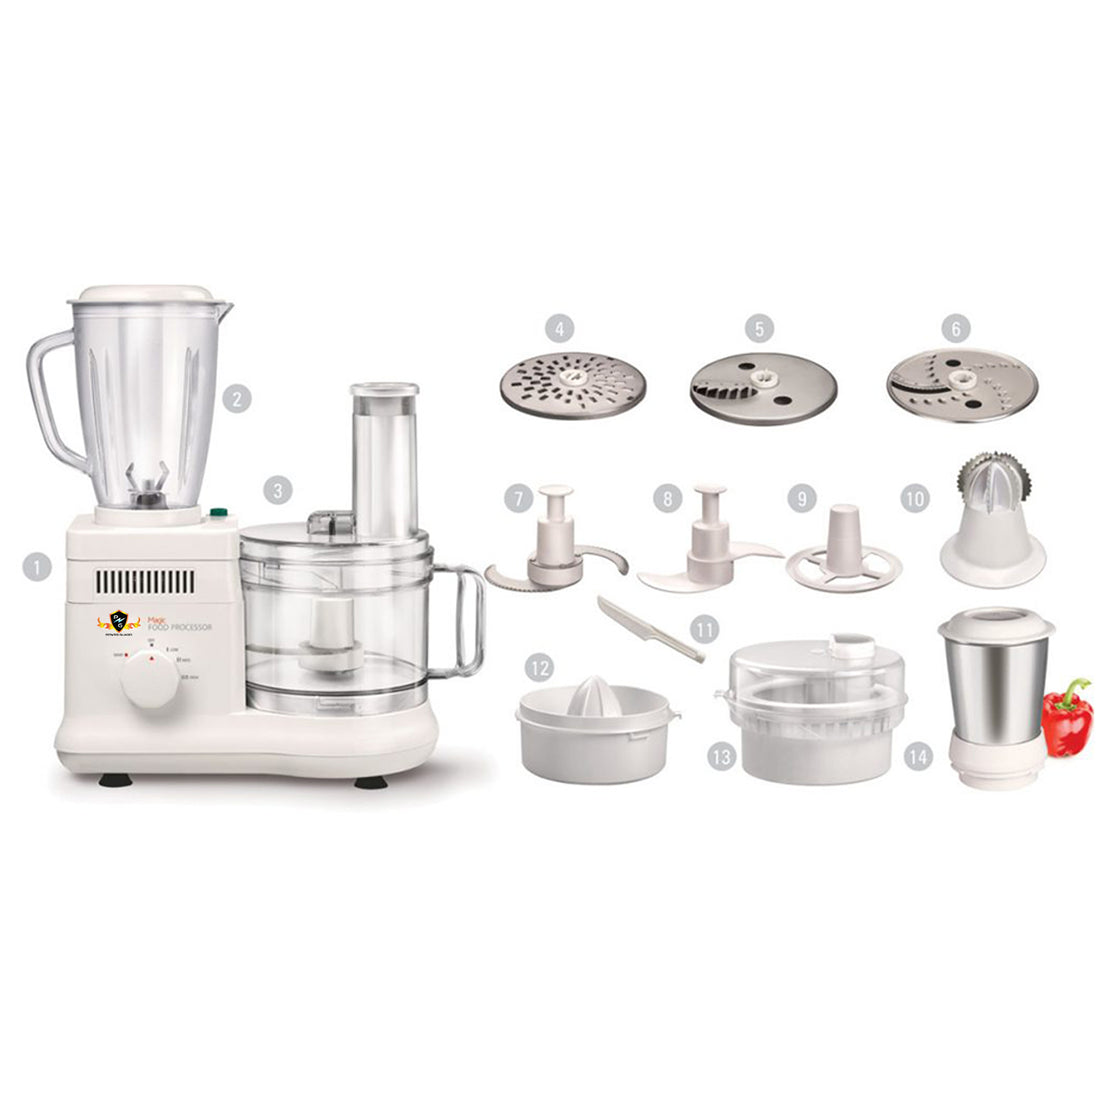 Best Food Processors in India: Top Picks and Price Guide